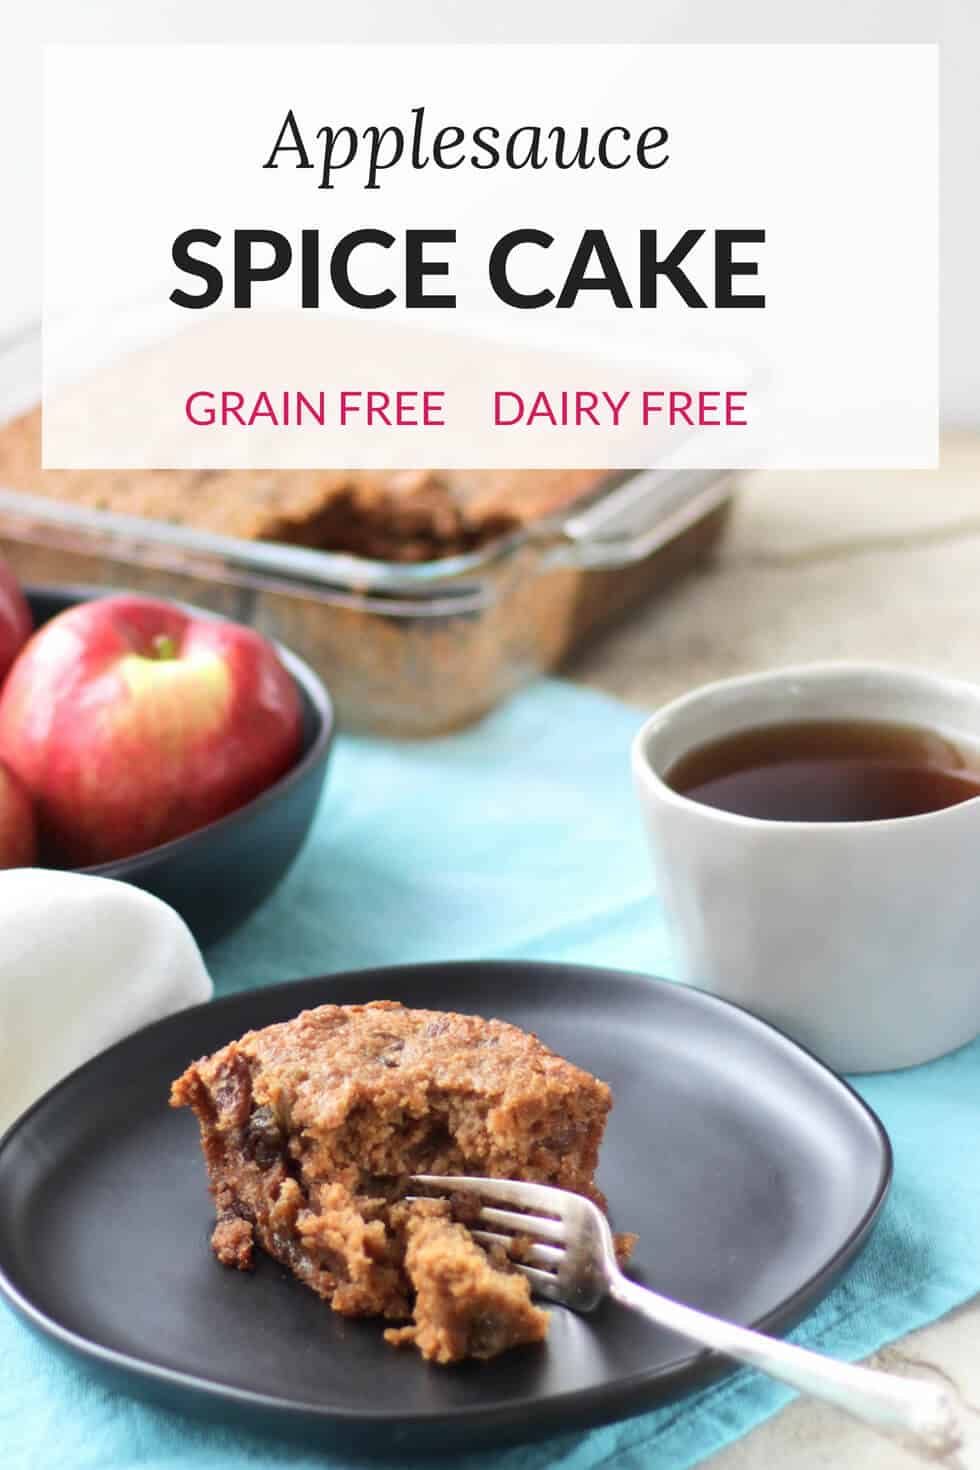 Gluten Free Applesauce Spice Cake made from scratch with coconut oil and raisins #recipe #withoutbutter #glutenfree #grainfree #dairyfree